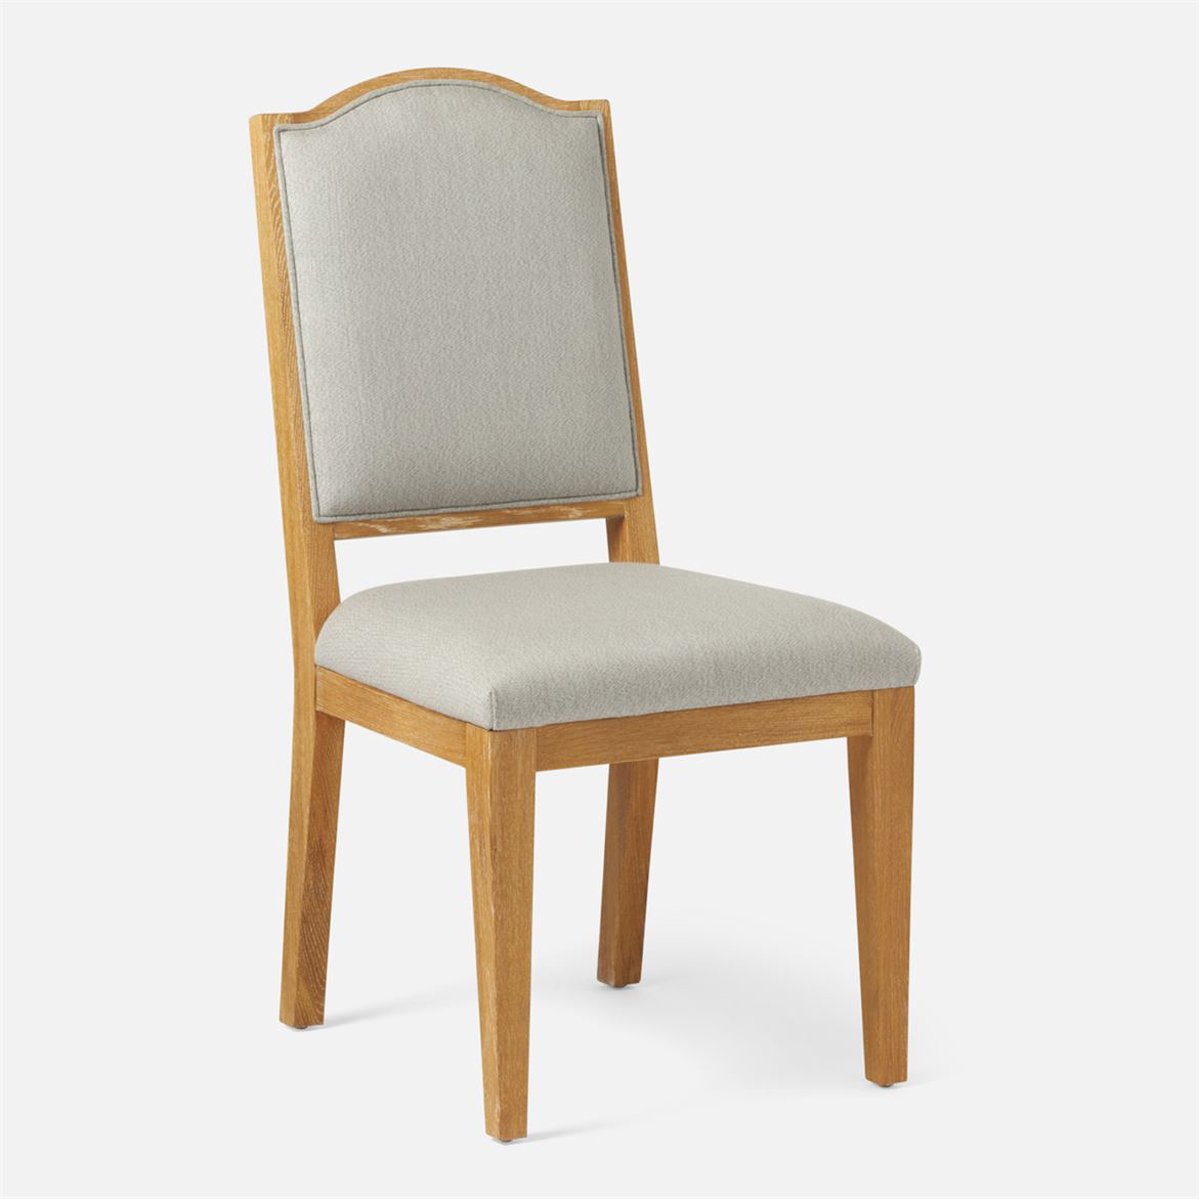 Made Goods Salem Upholstered Dining Chair in Brenta Cotton/Jute